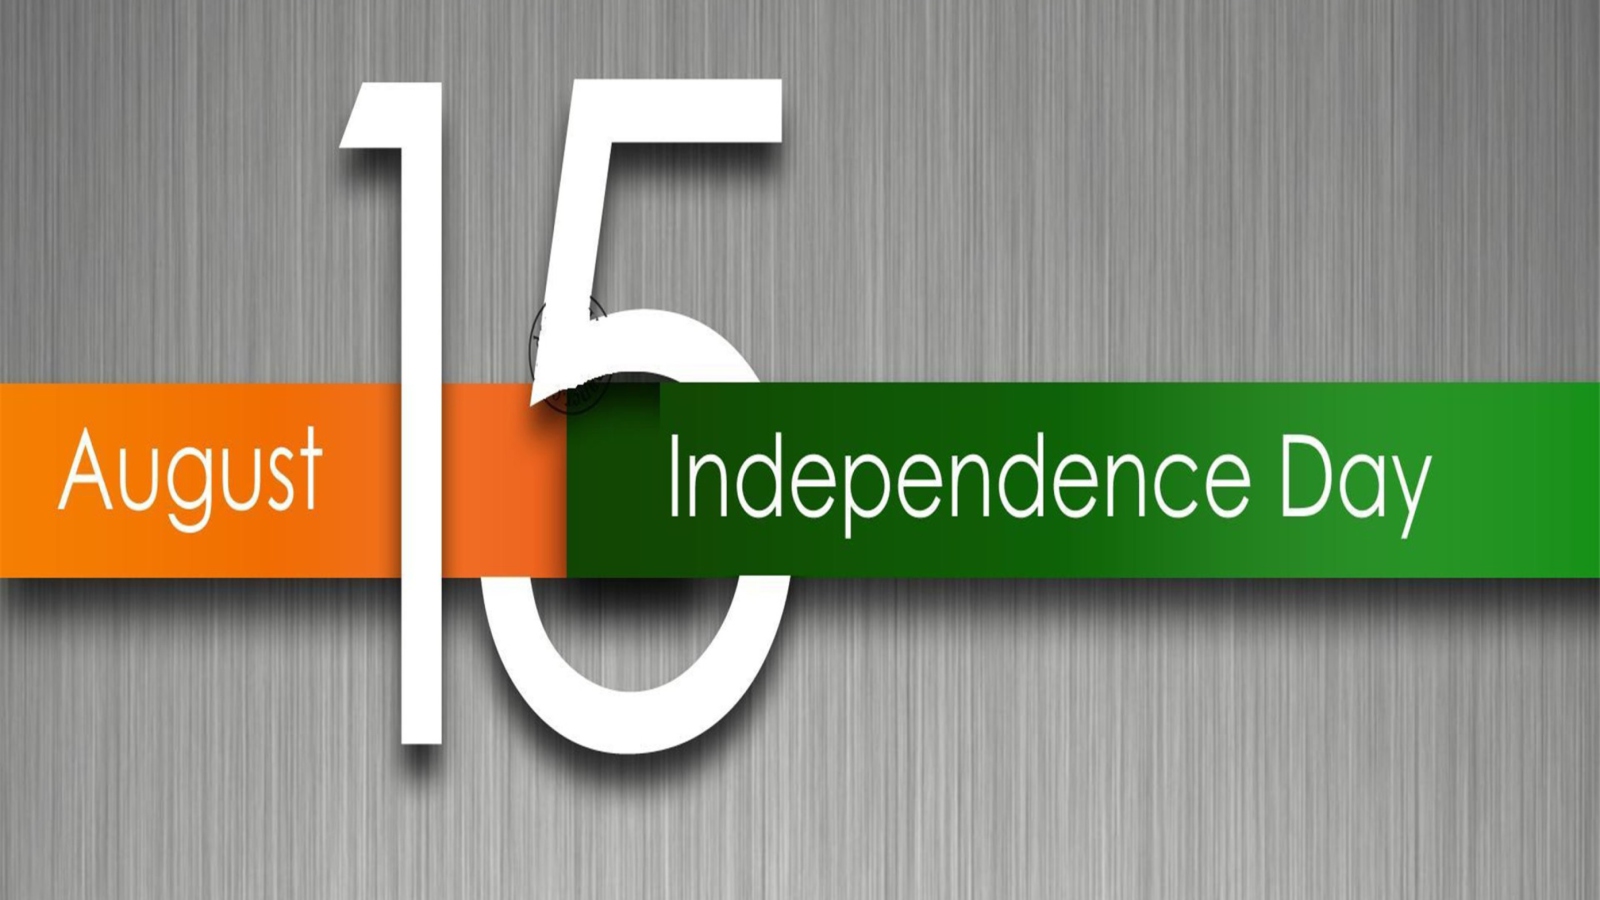 Independence Day in India wallpaper 1600x900